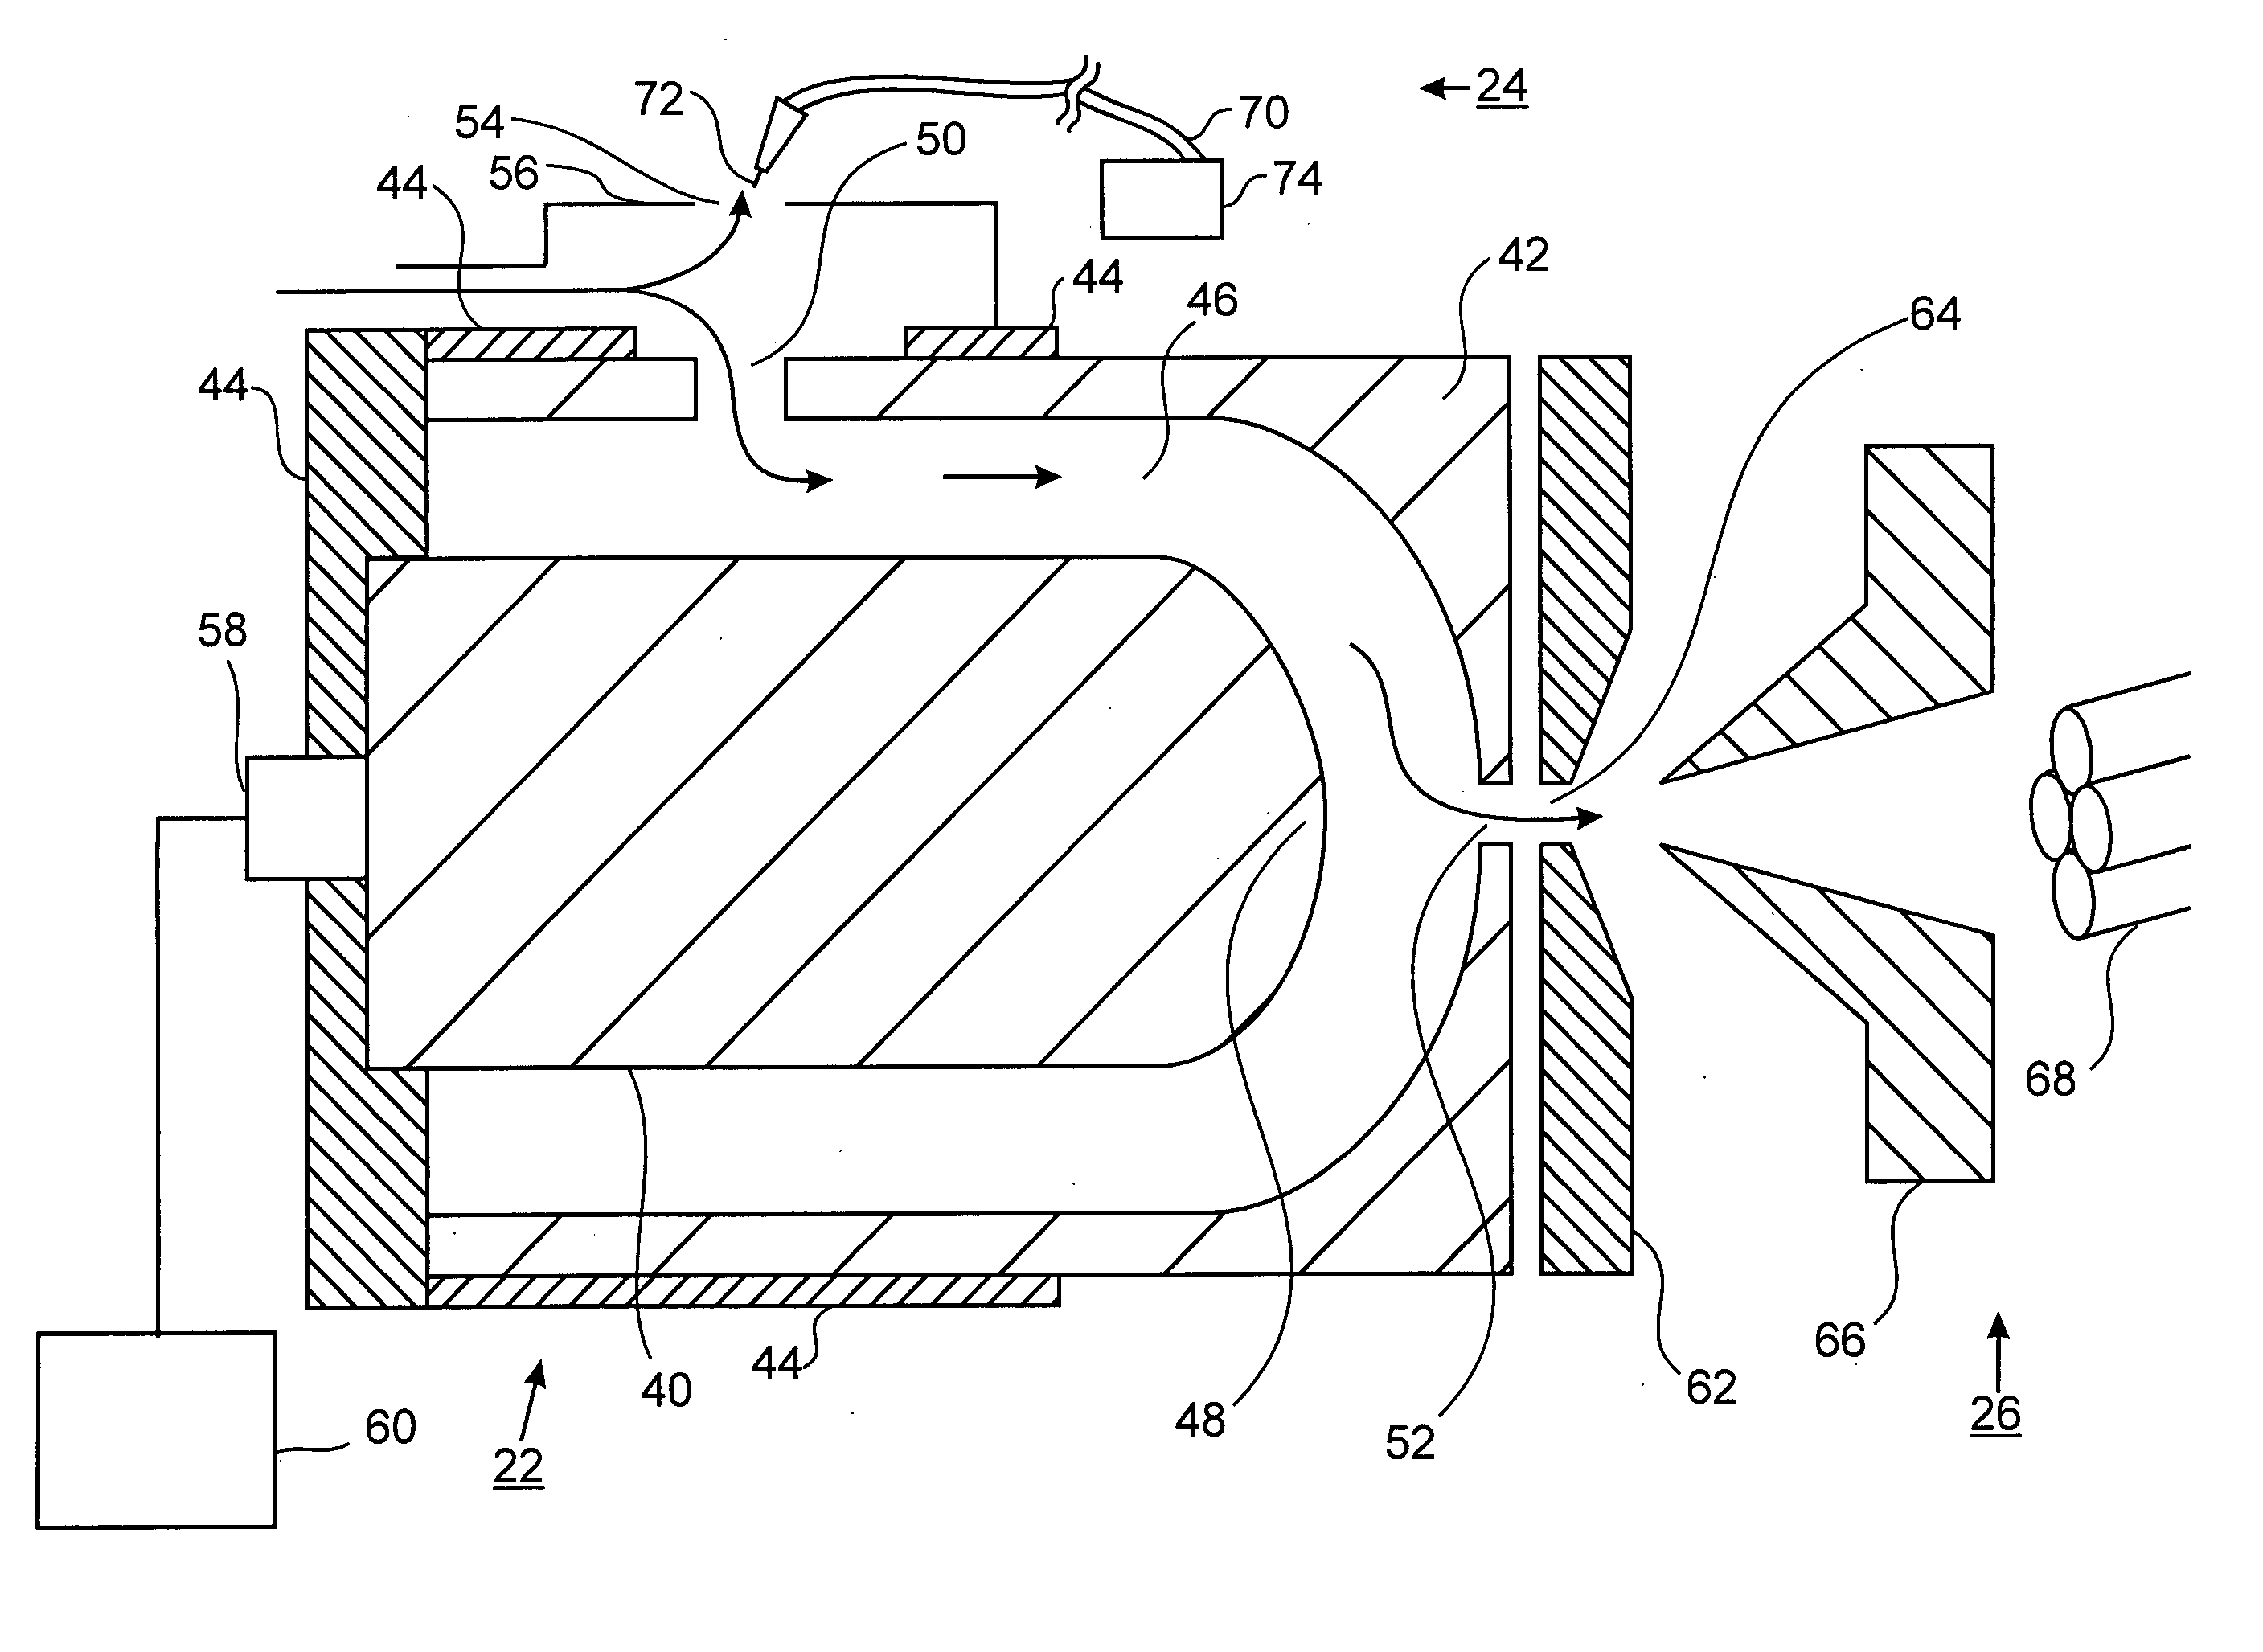 Faims apparatus and method for detecting trace amounts of a vapour in a carrier gas